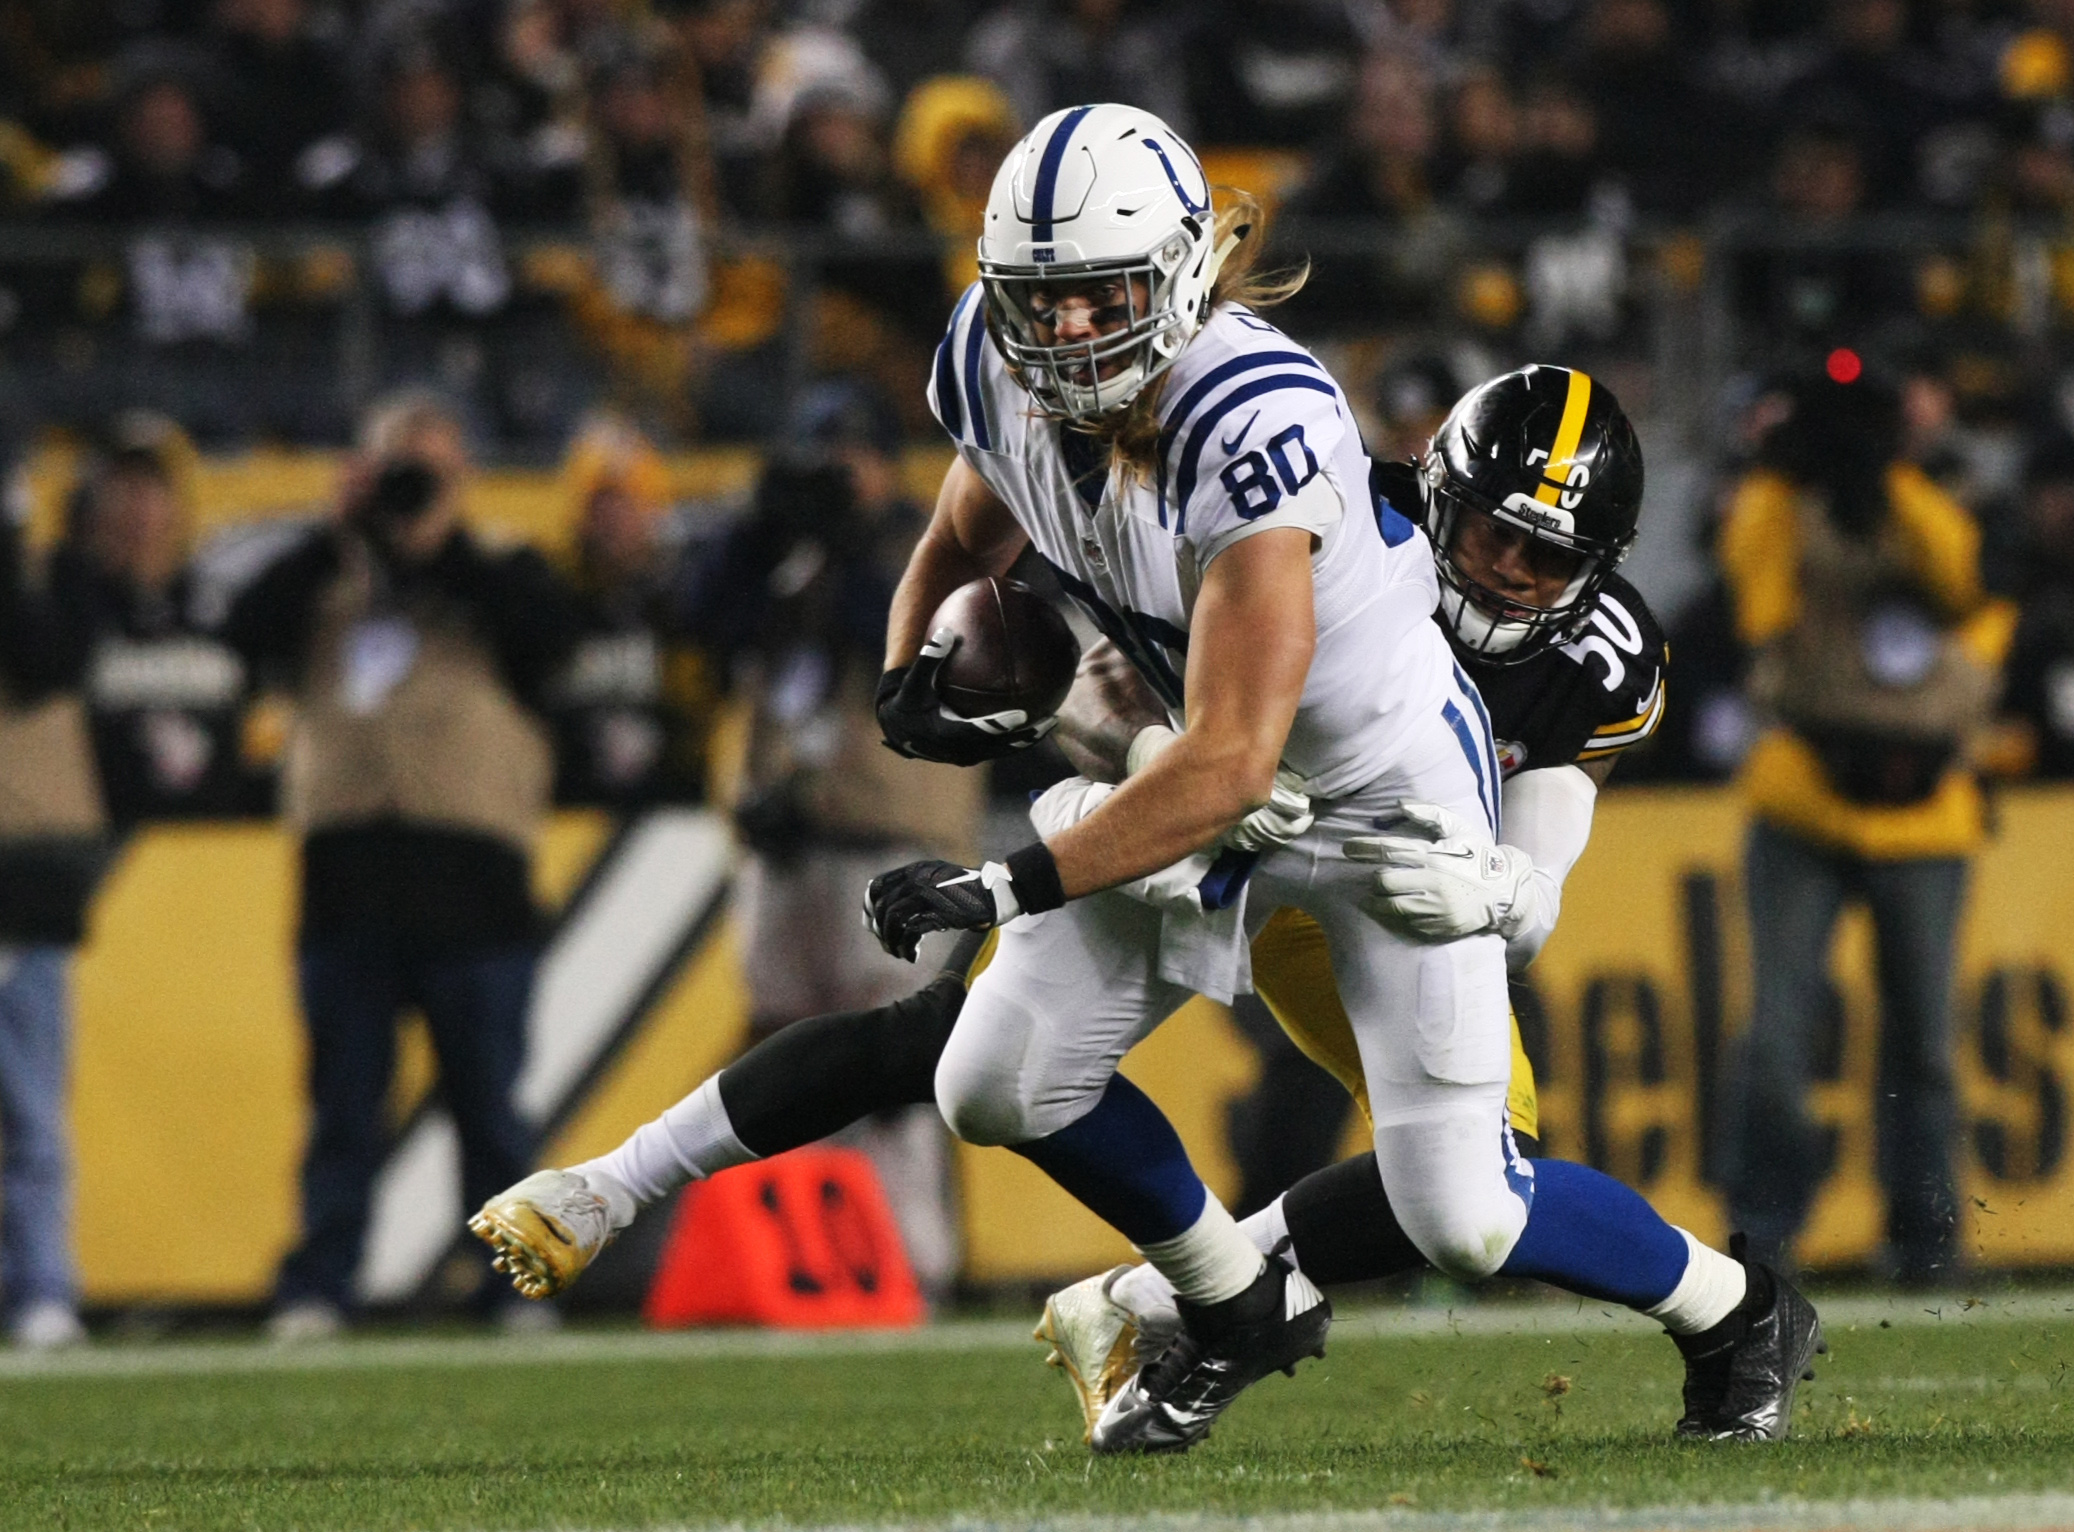 What do you think about Fleener agreeing to a deal with the Saints?